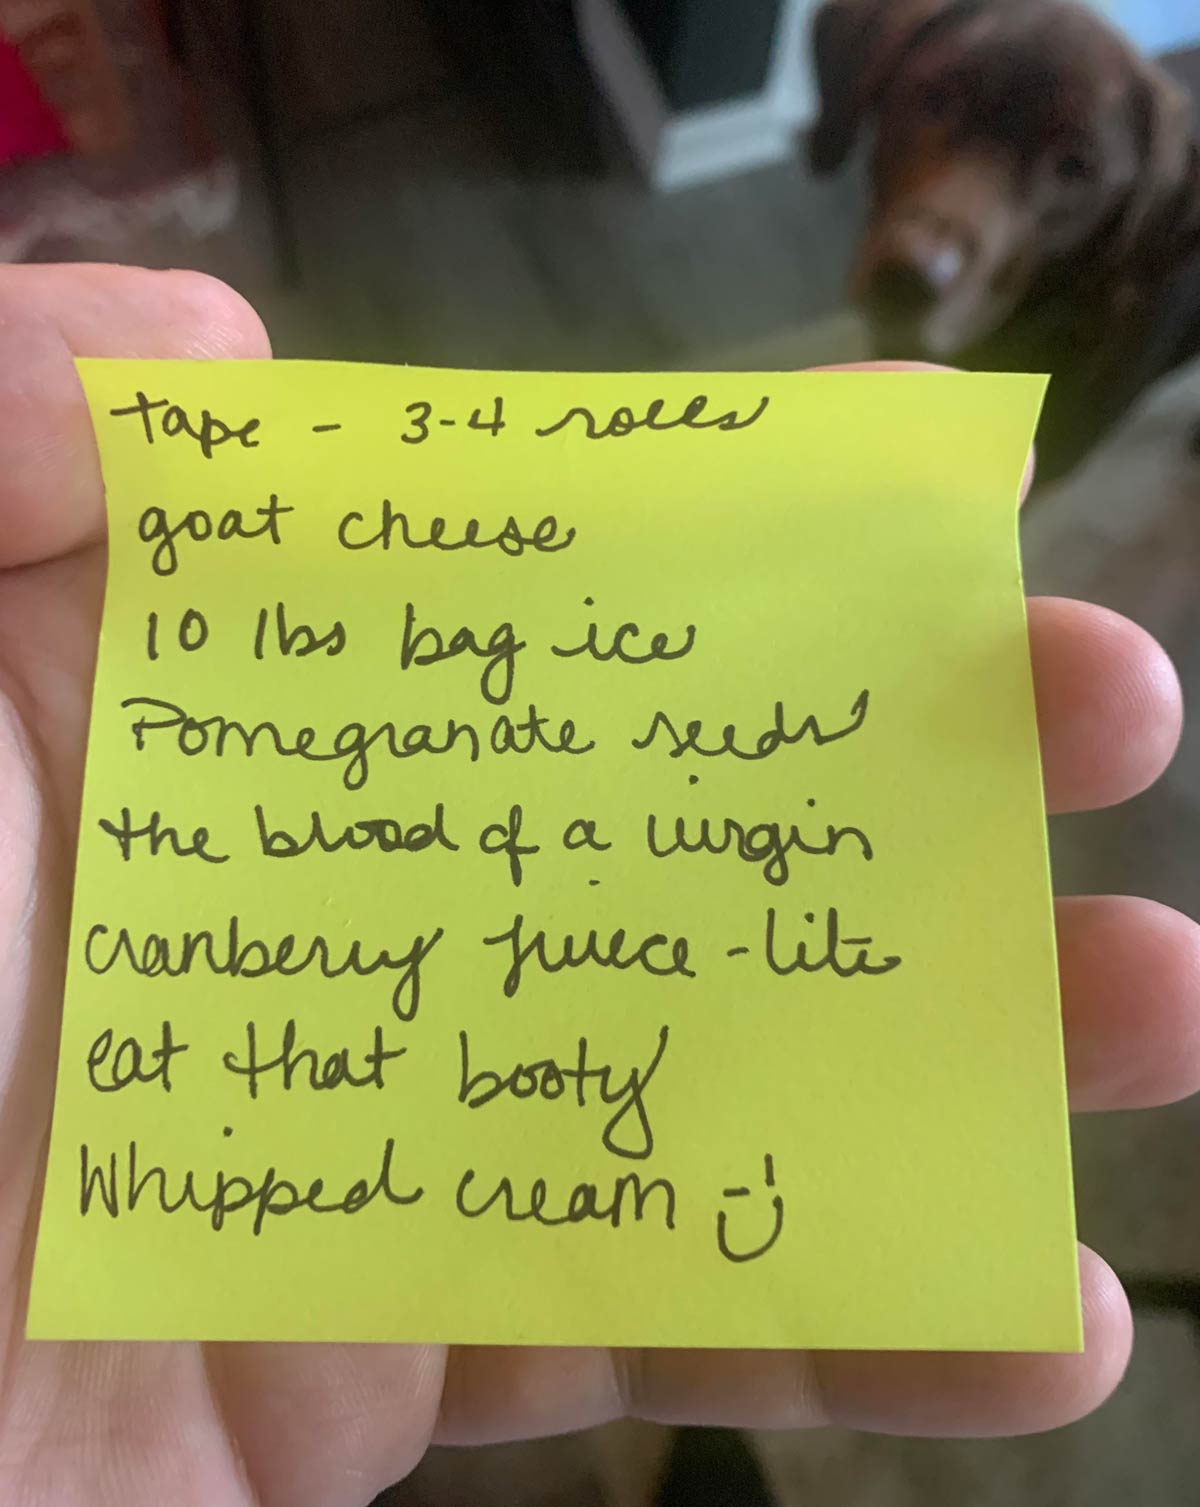 My last minute thanksgiving shopping list from my wife